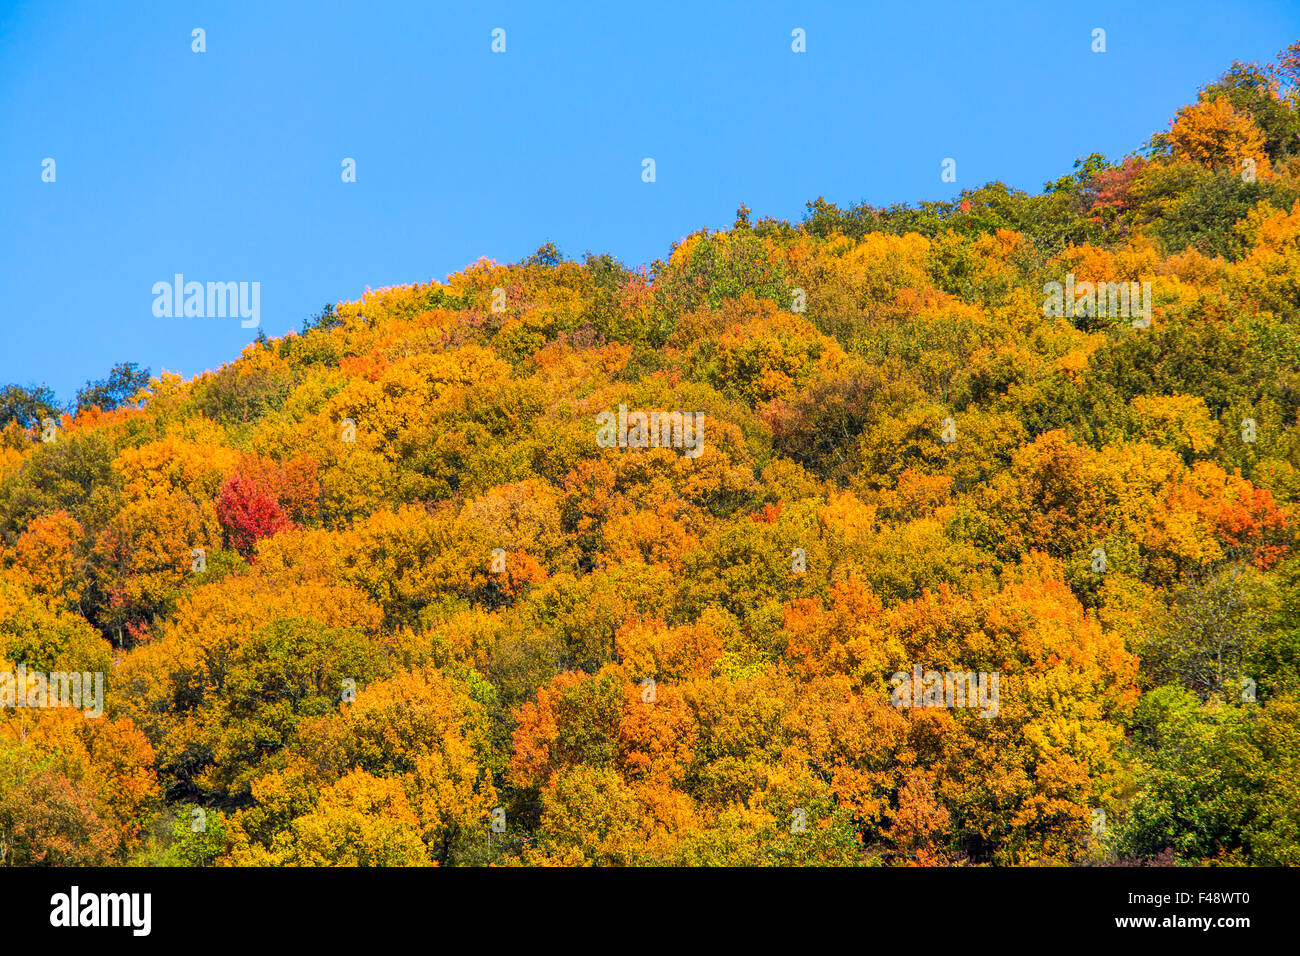 Fall, colorful landscape, forest in rich color, autumn leaves, foliage, Rhine valley, Germany Stock Photo